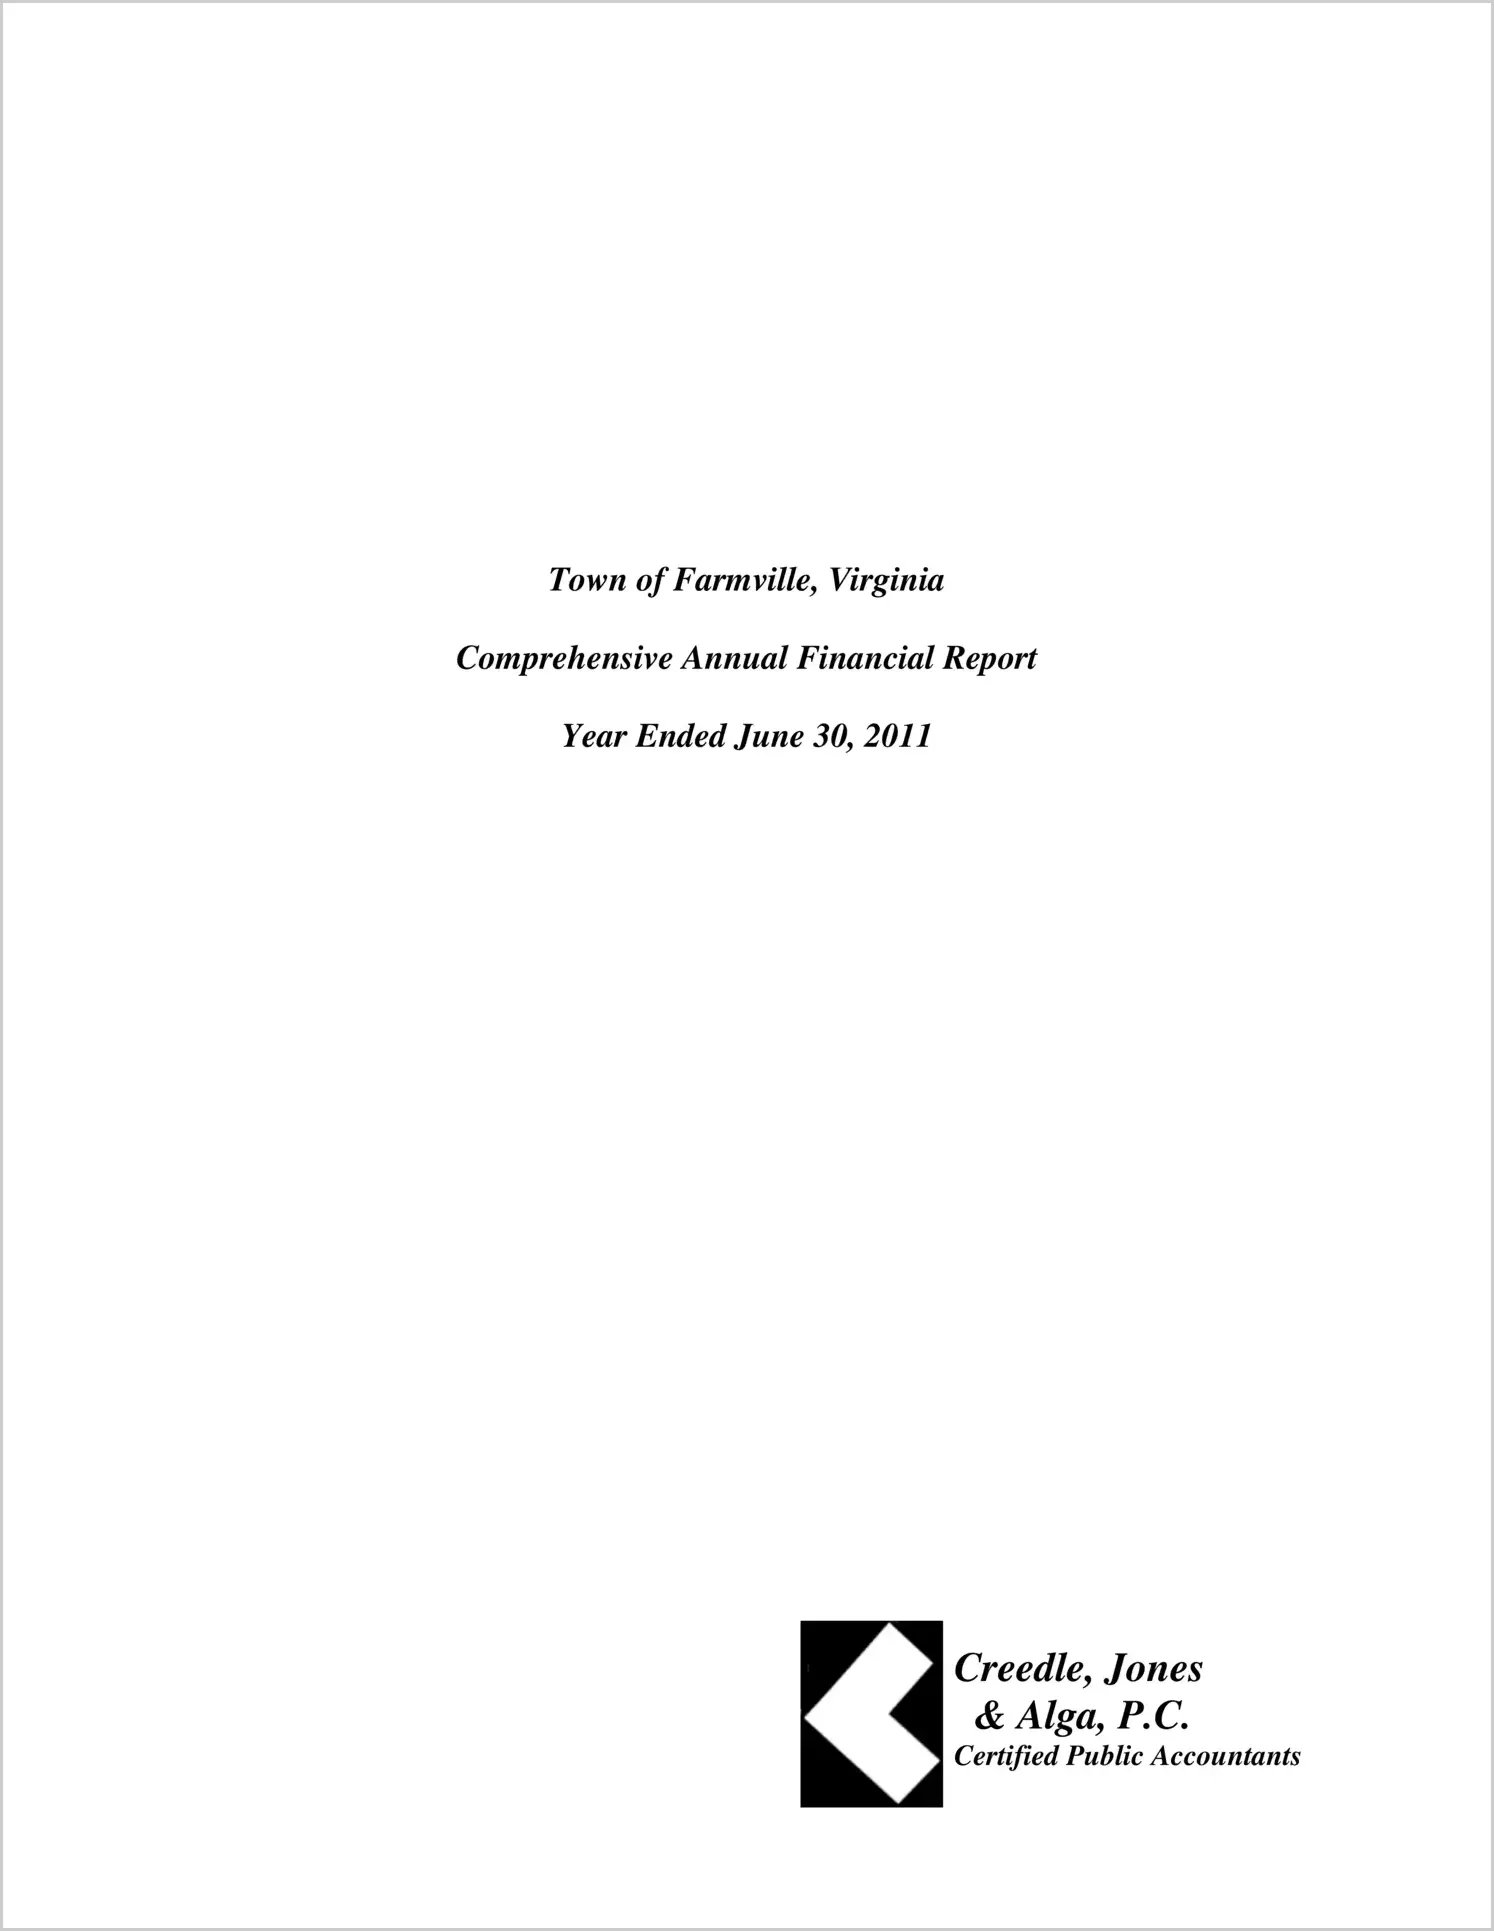 2011 Annual Financial Report for Town of Farmville